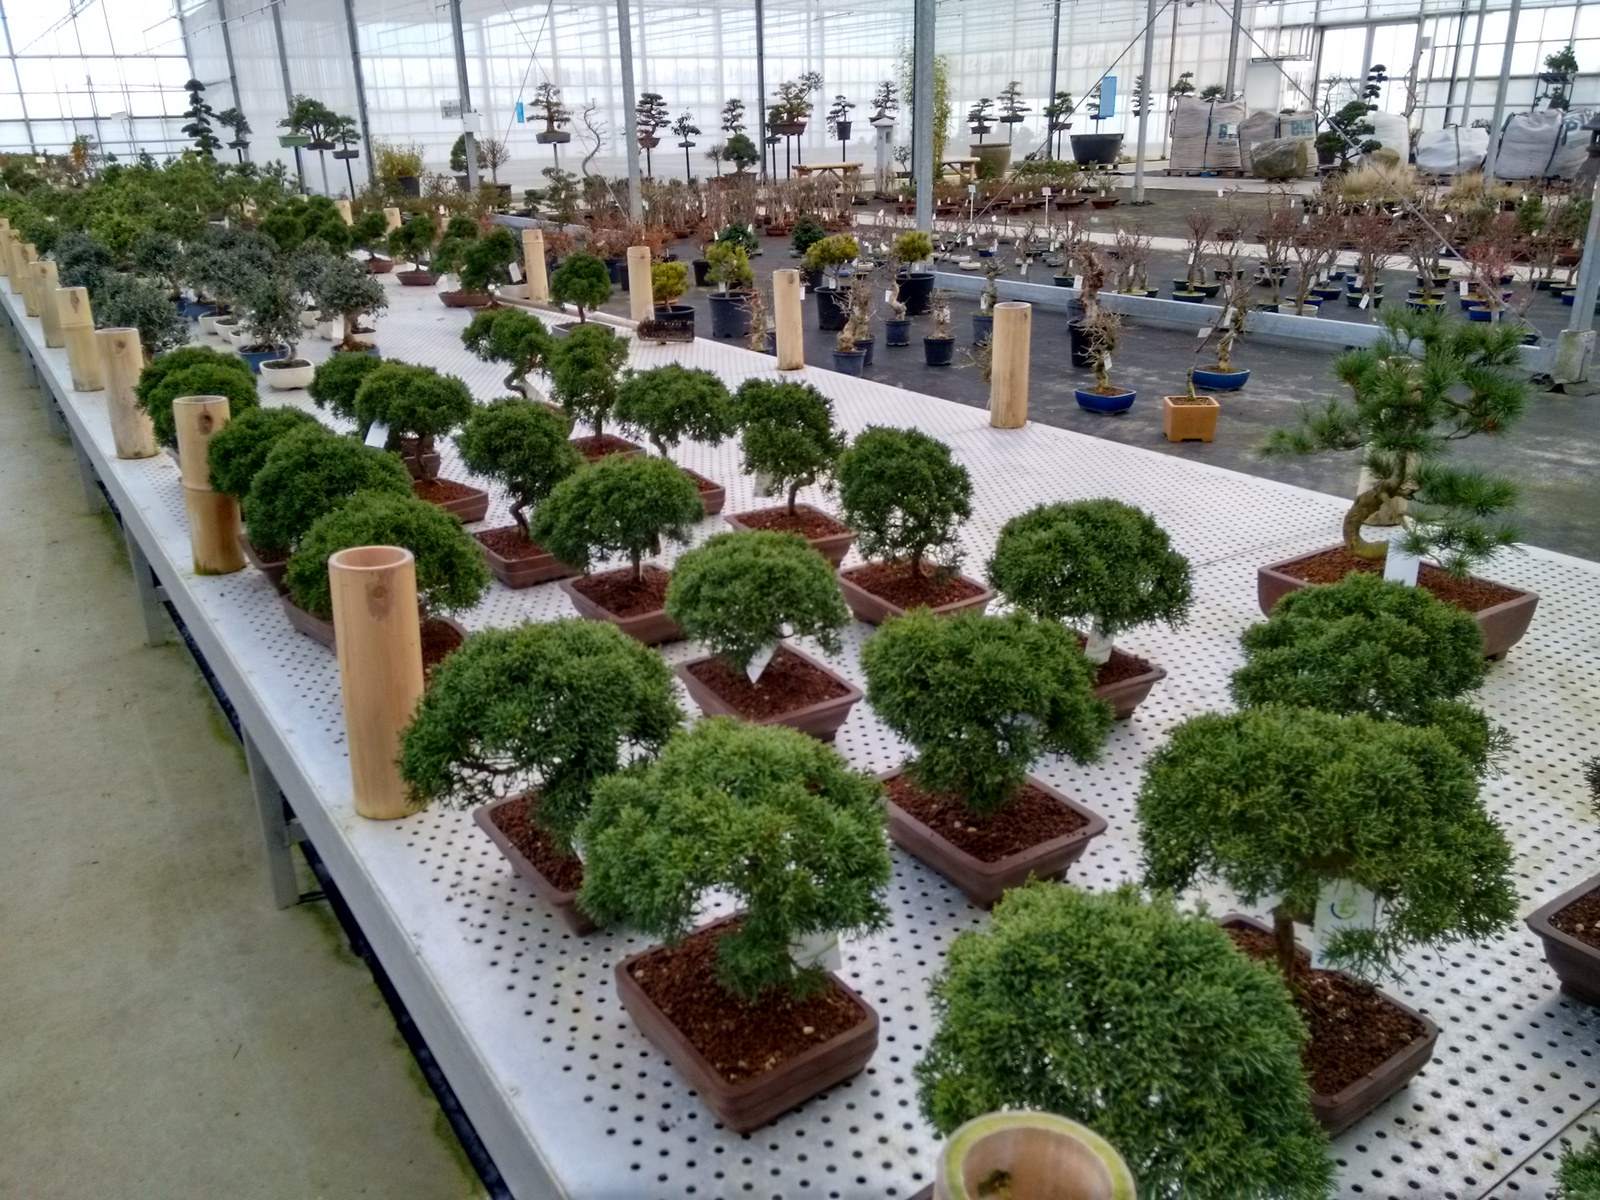 bonsai lodder8 Bonsai Lodder   One of the Largest Bonsai Store in the World, Netherlands